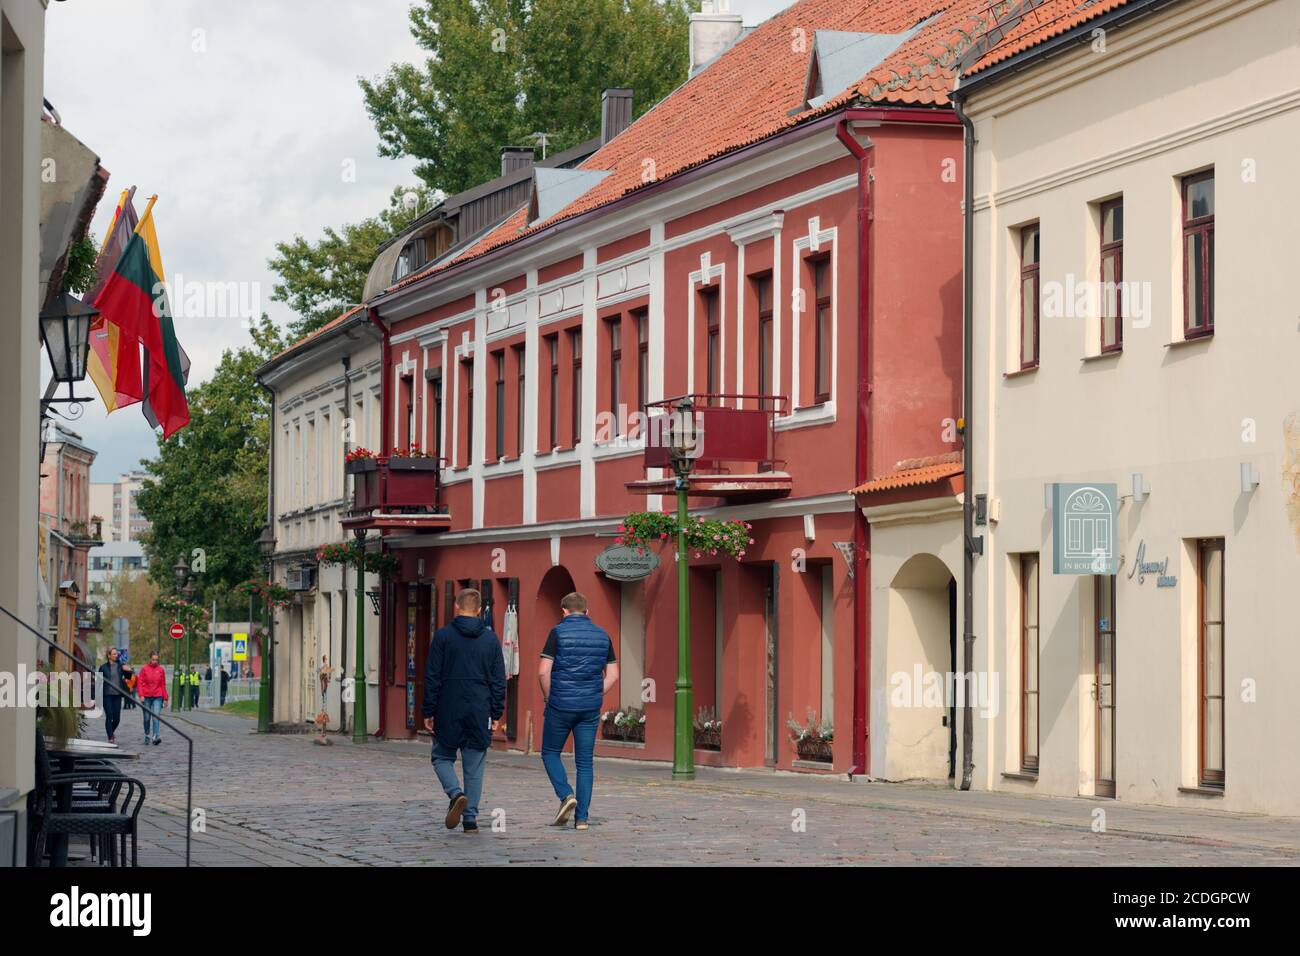 People on the street of historical centre of Kaunas, Lithuania Stock Photo